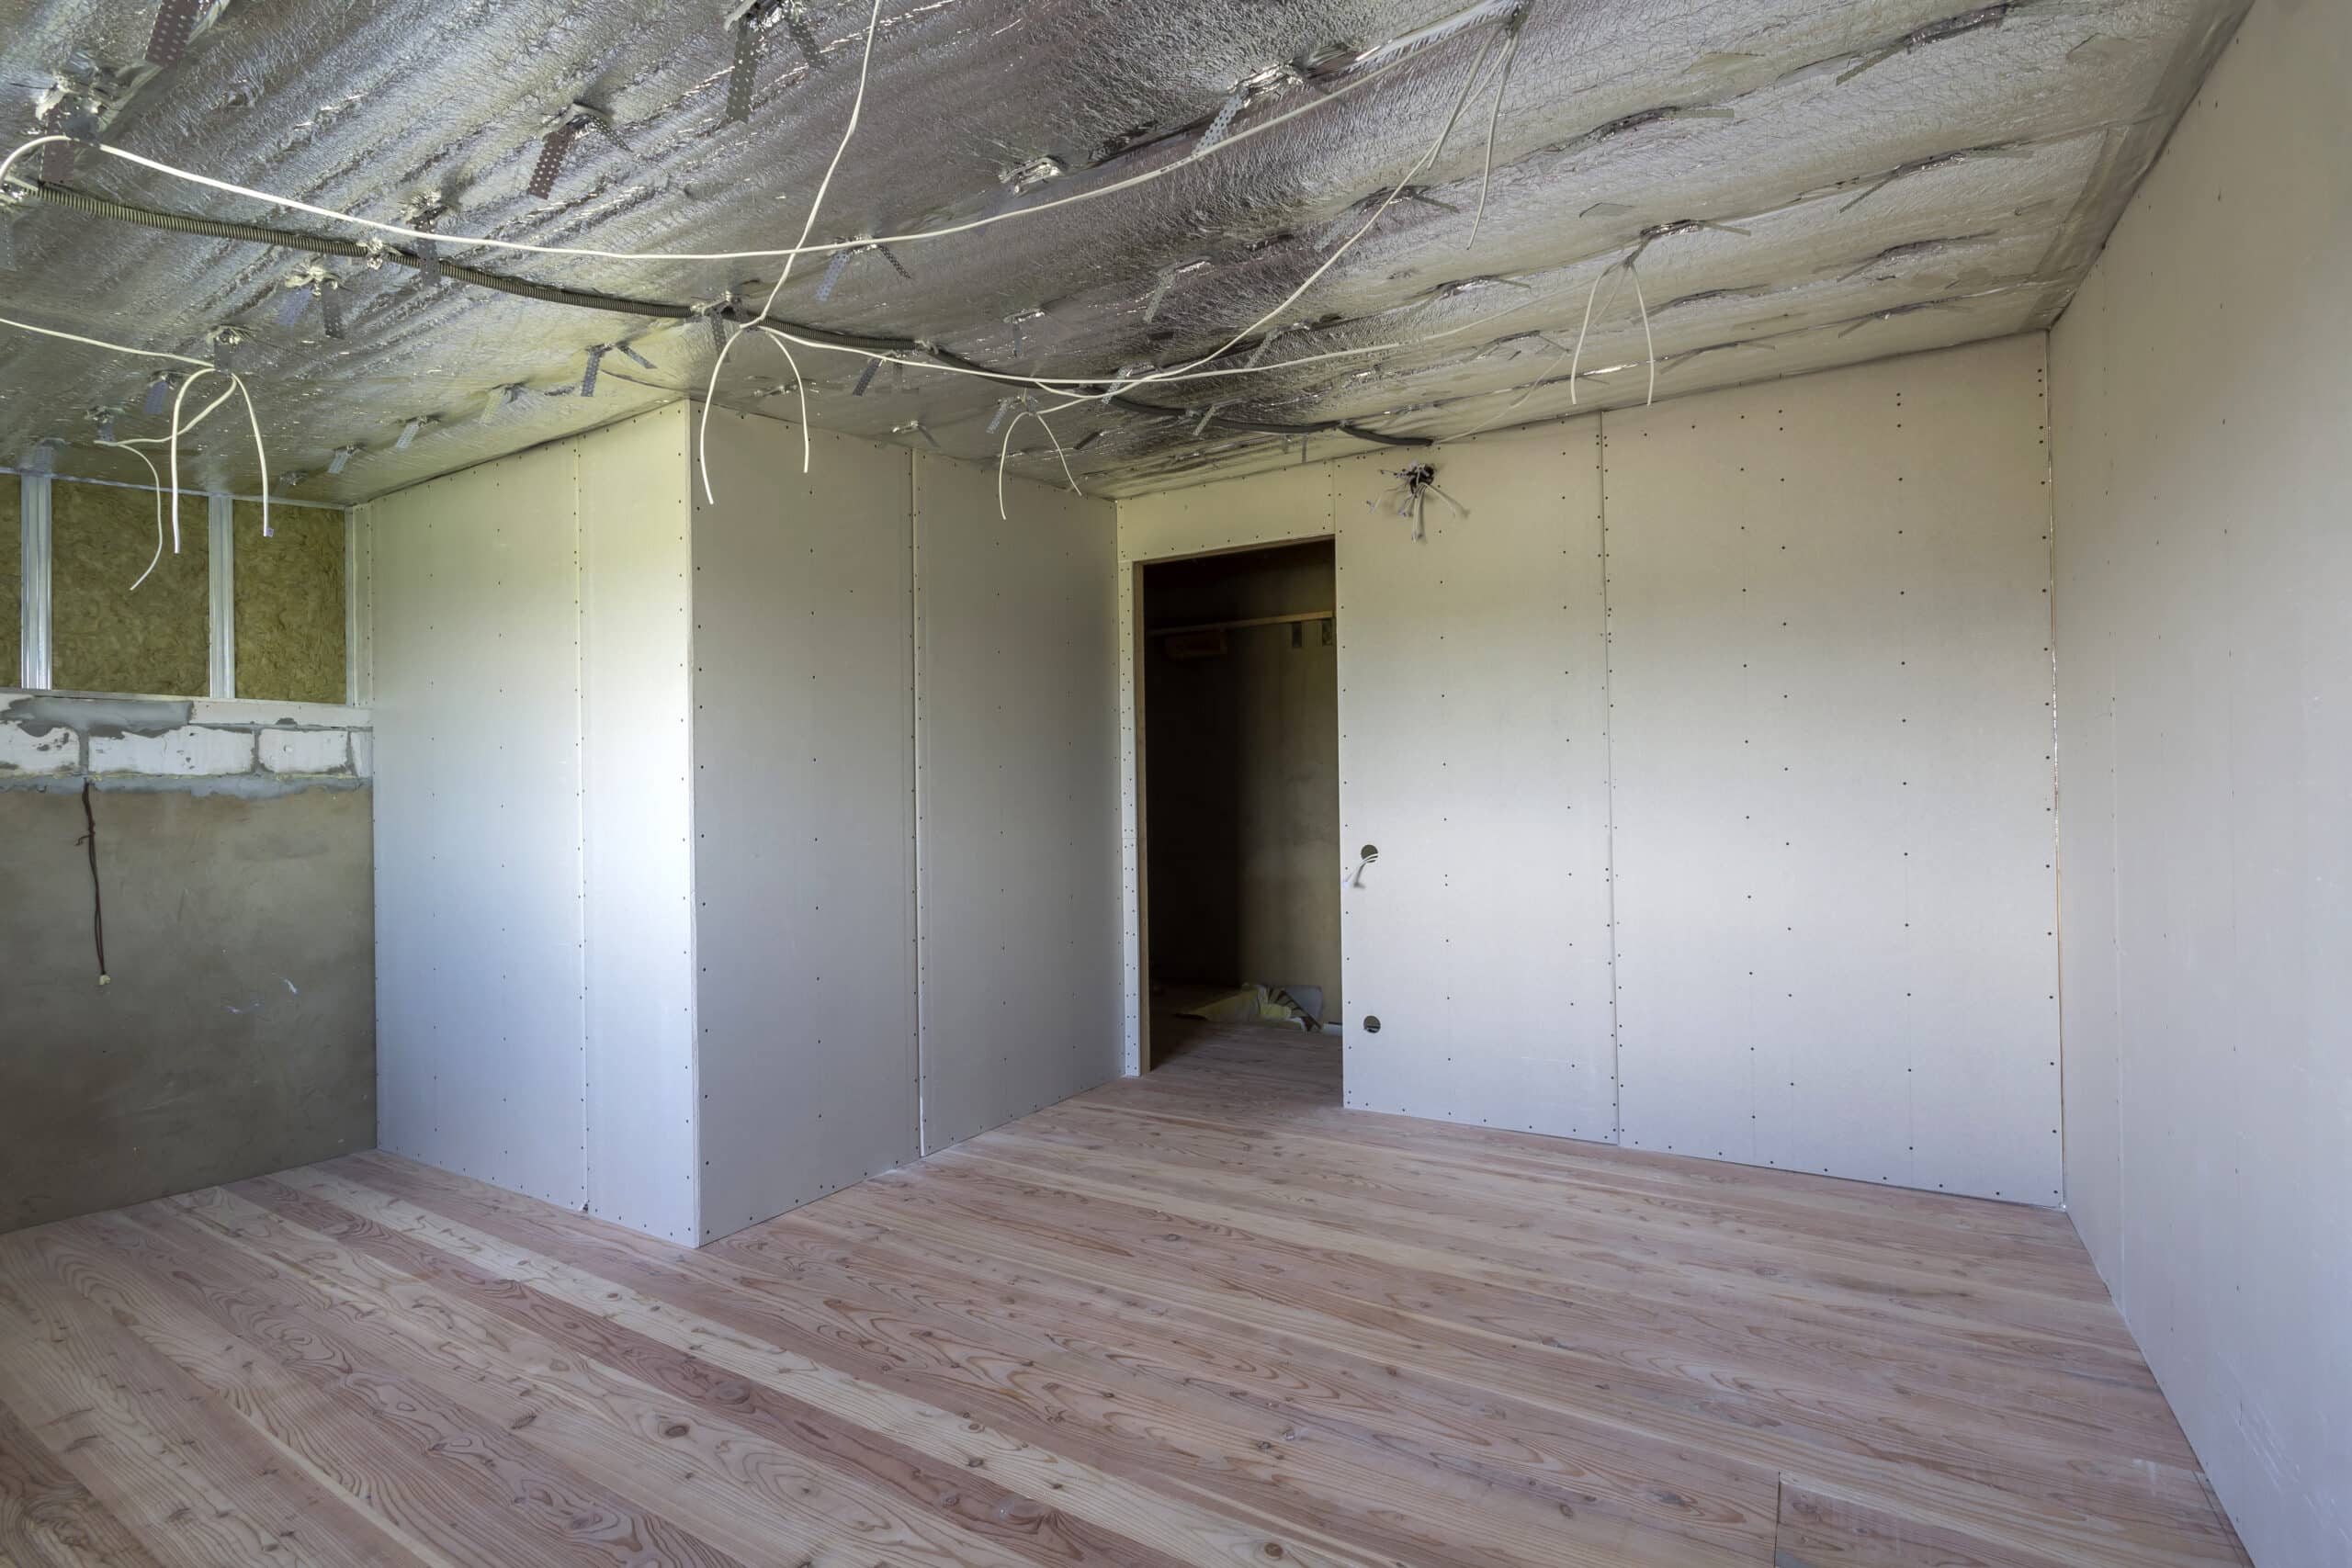 room under construction with silver aluminum insulation foil and drywall on walls and ceiling.